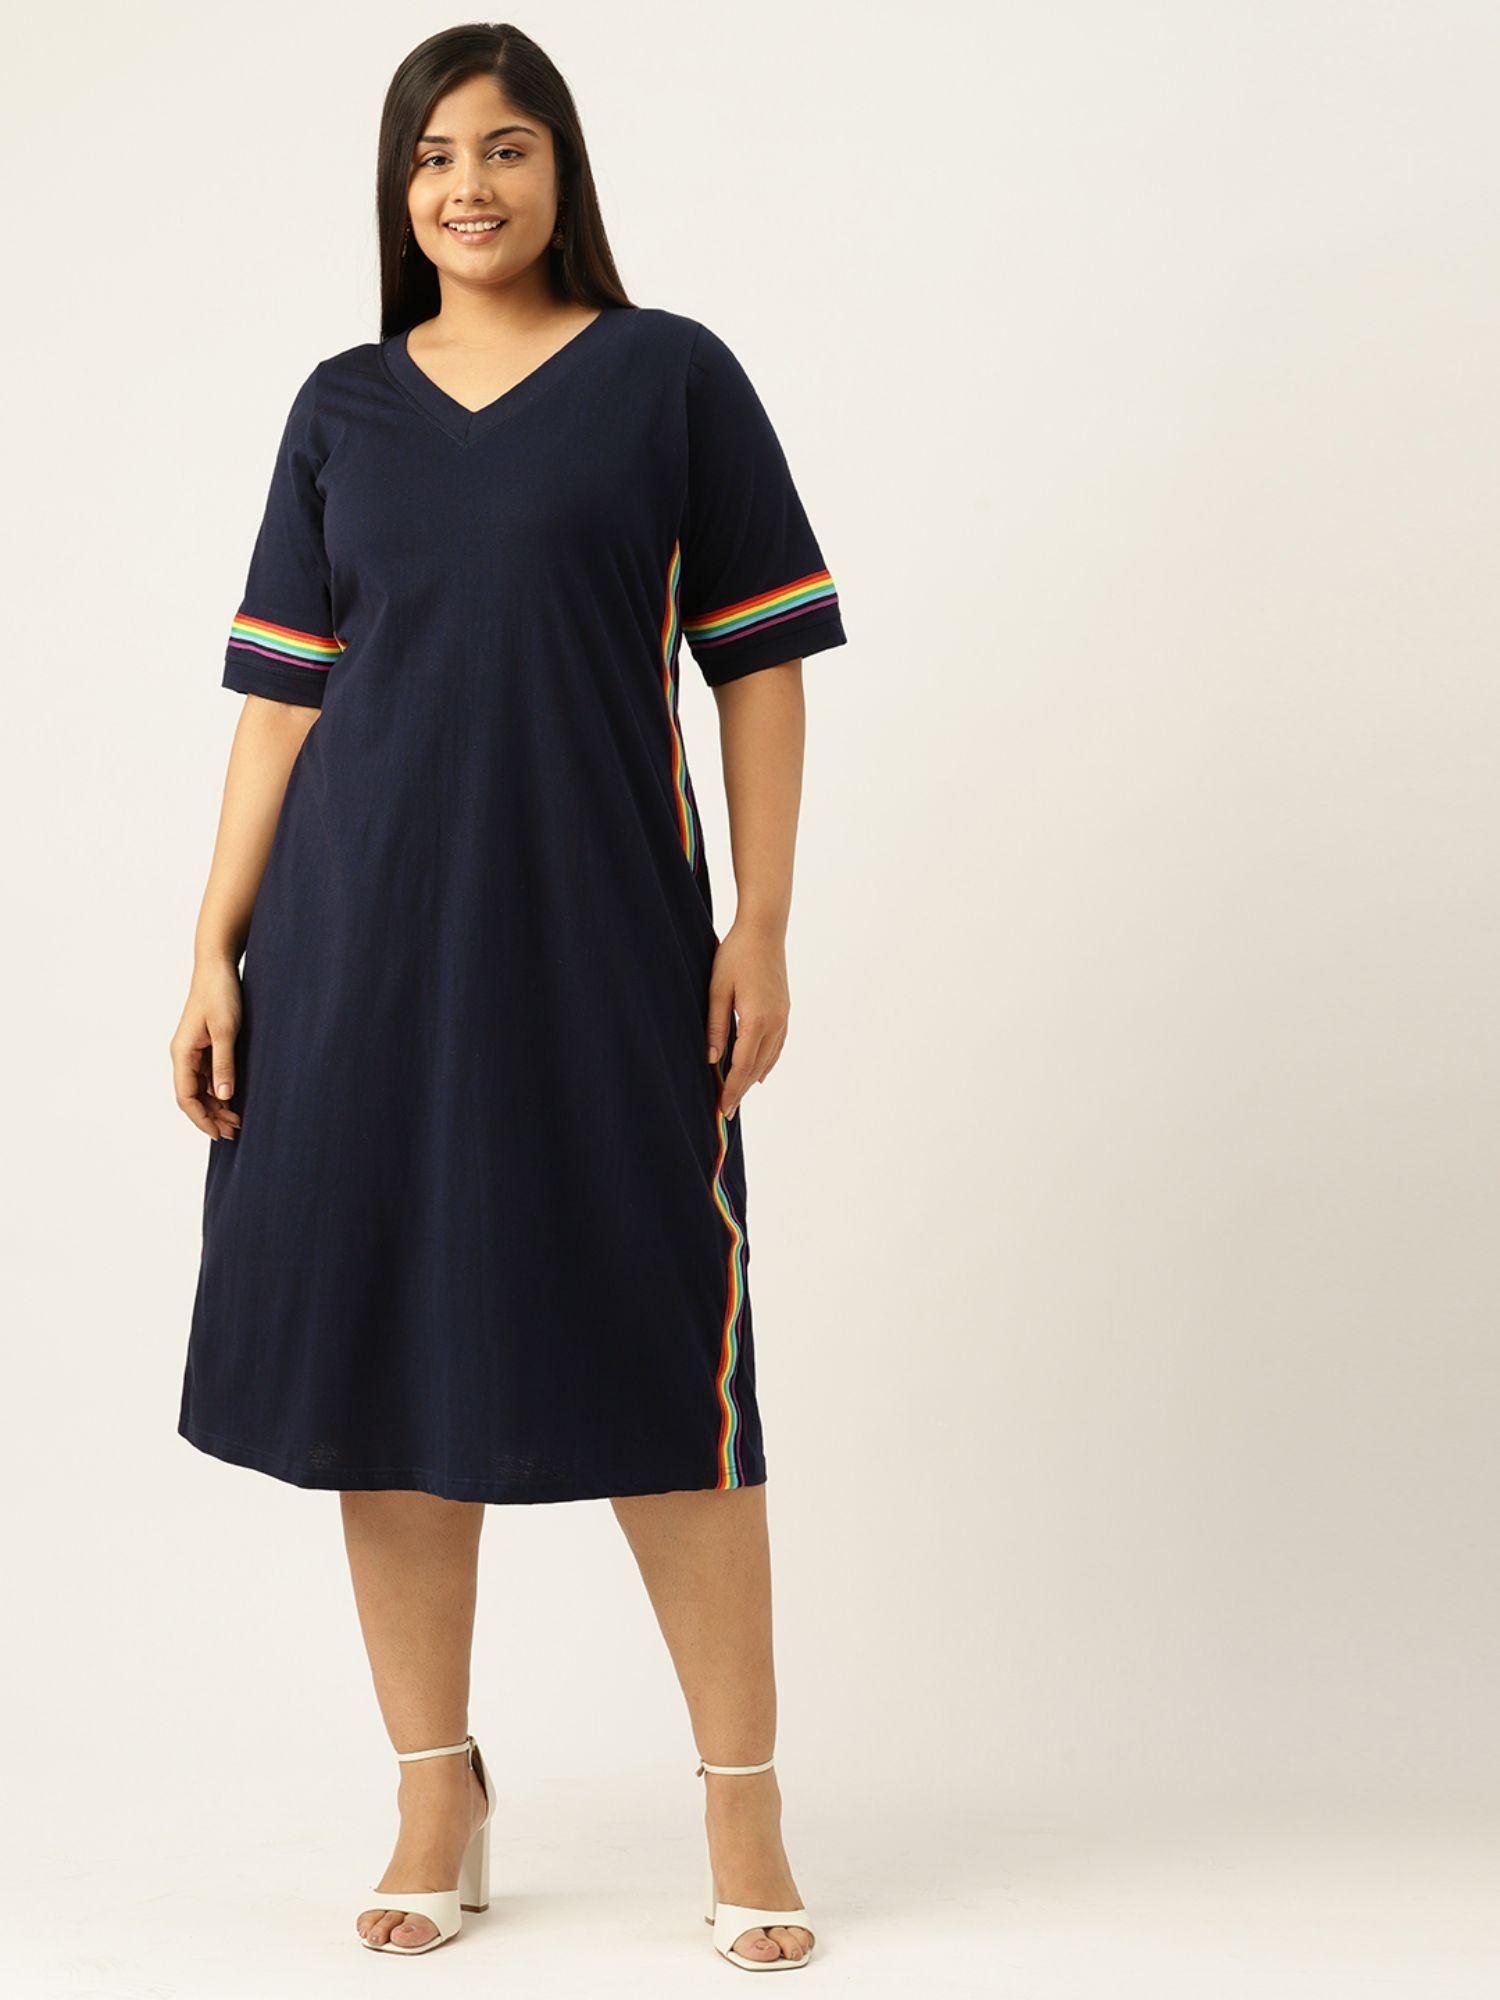 Plus Size Womens Navy Blue Solid Cotton Knitted A-Line Dress